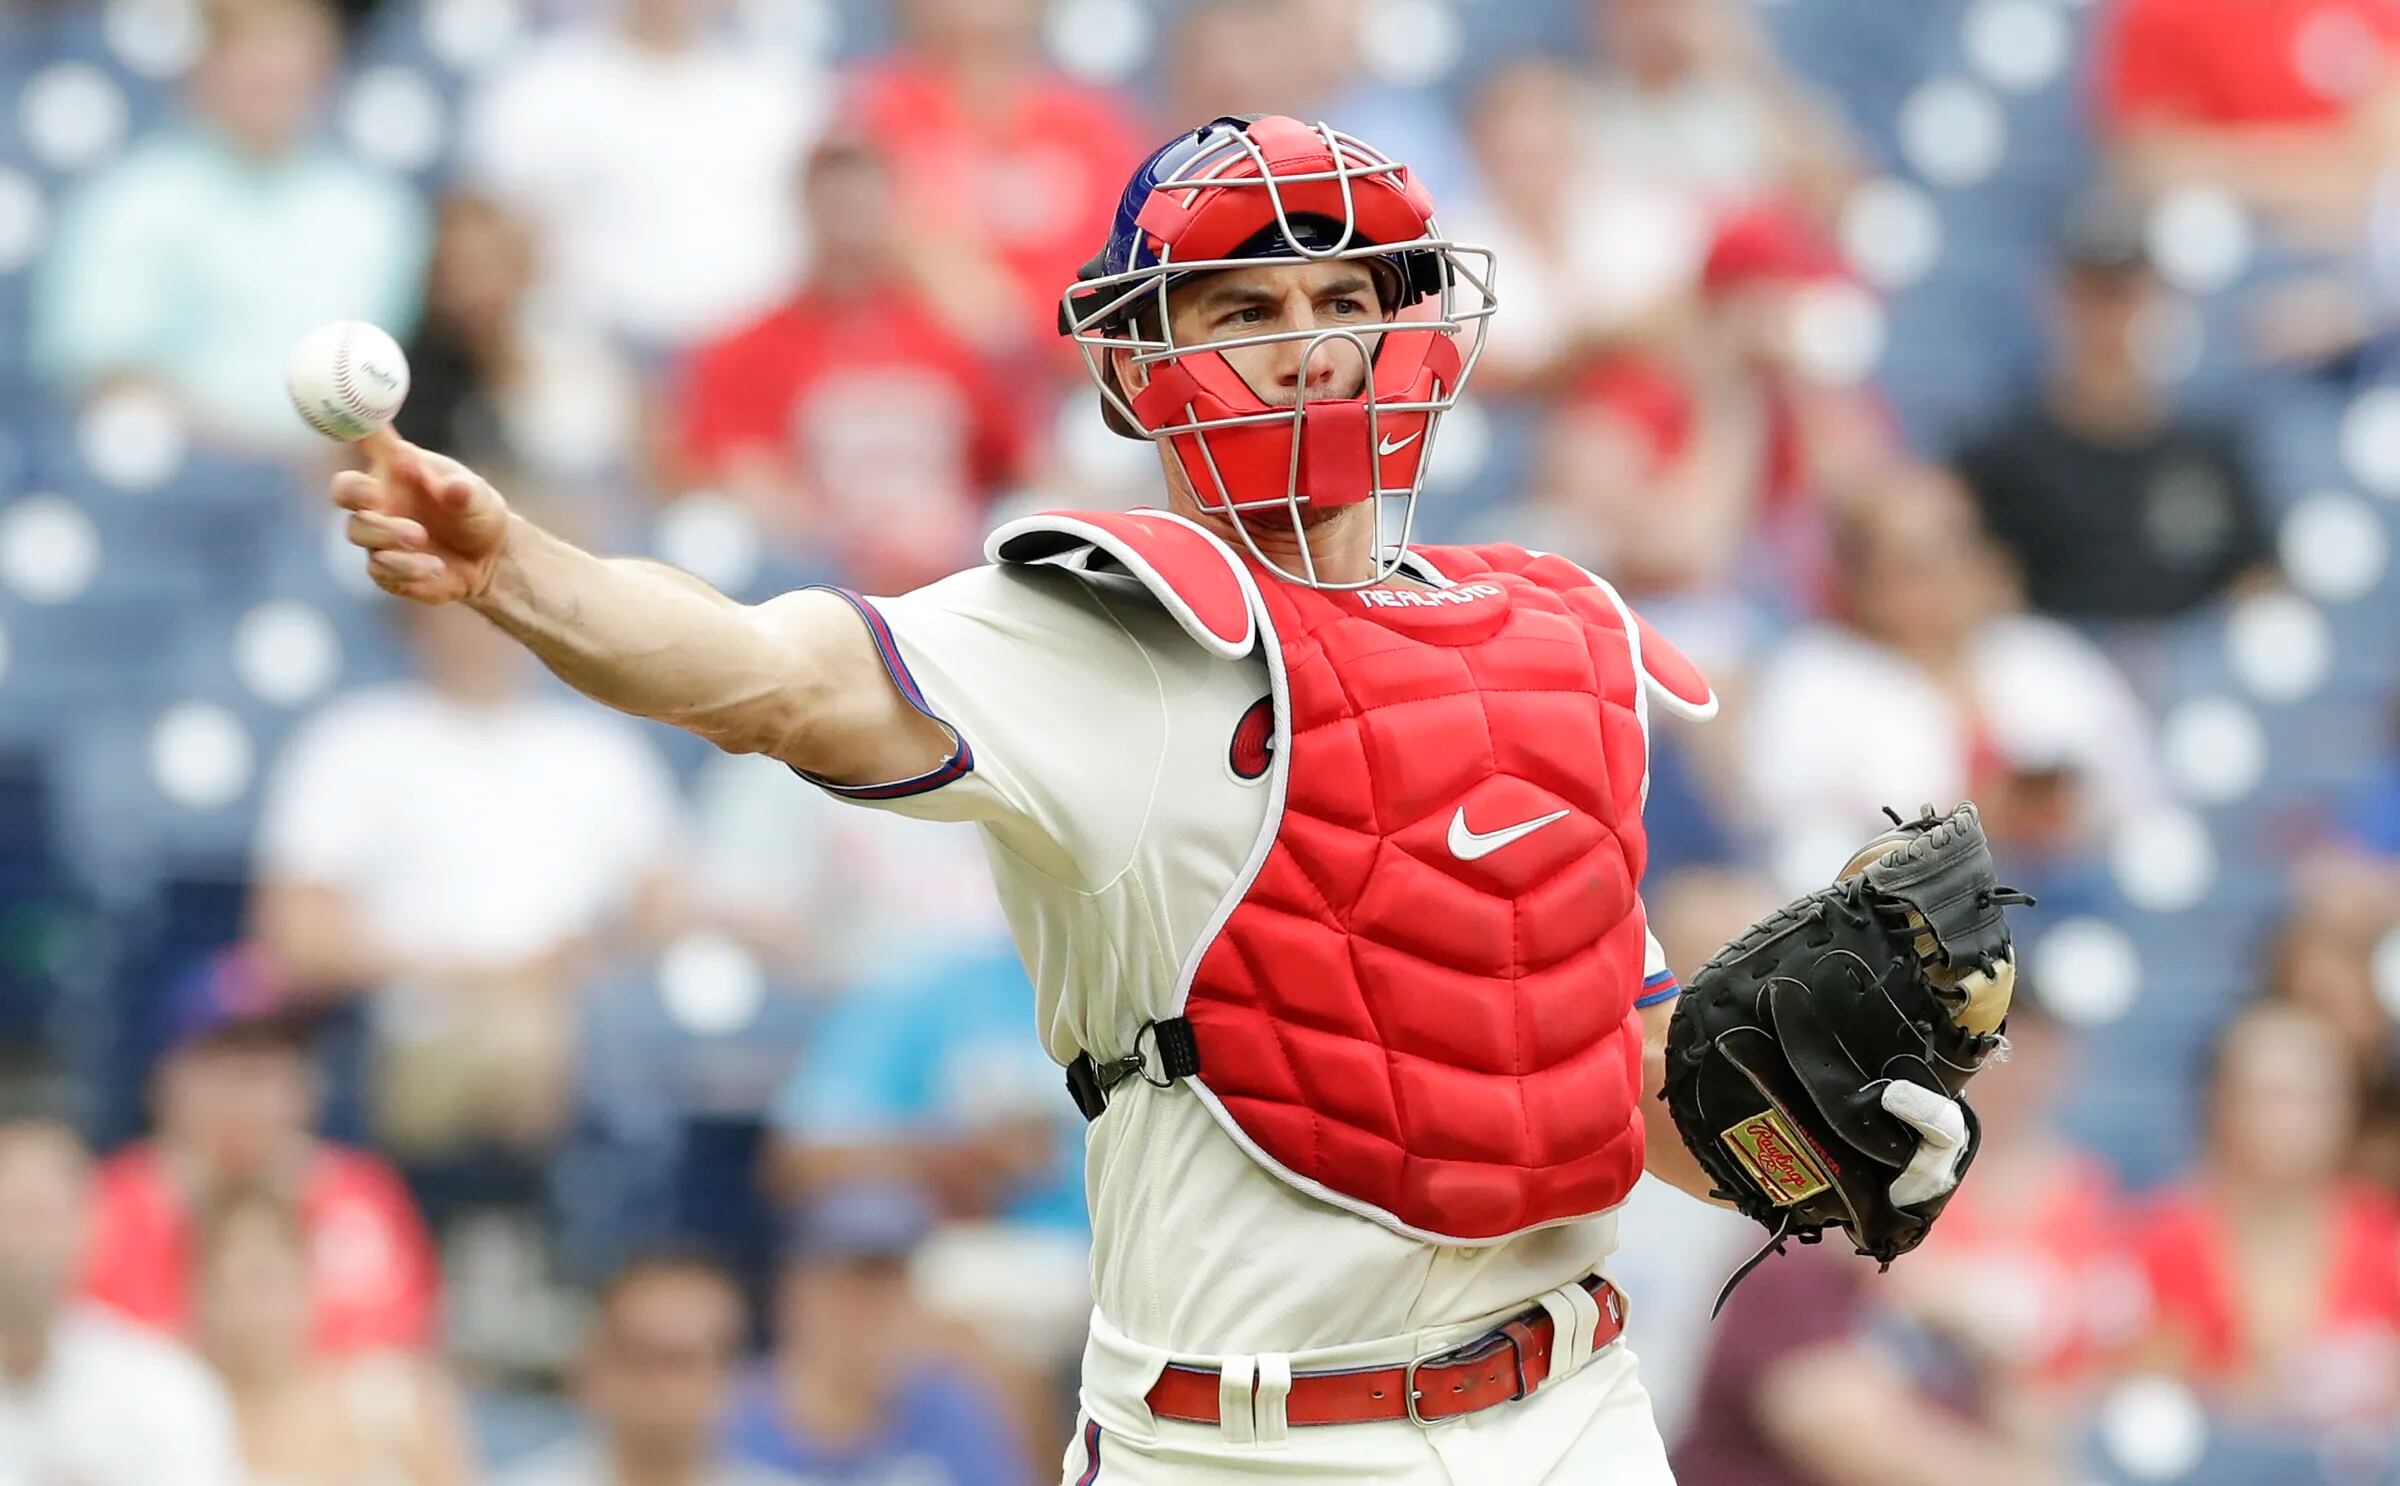 Phillies catcher J.T. Realmuto's three pillars of throwing out baserunners